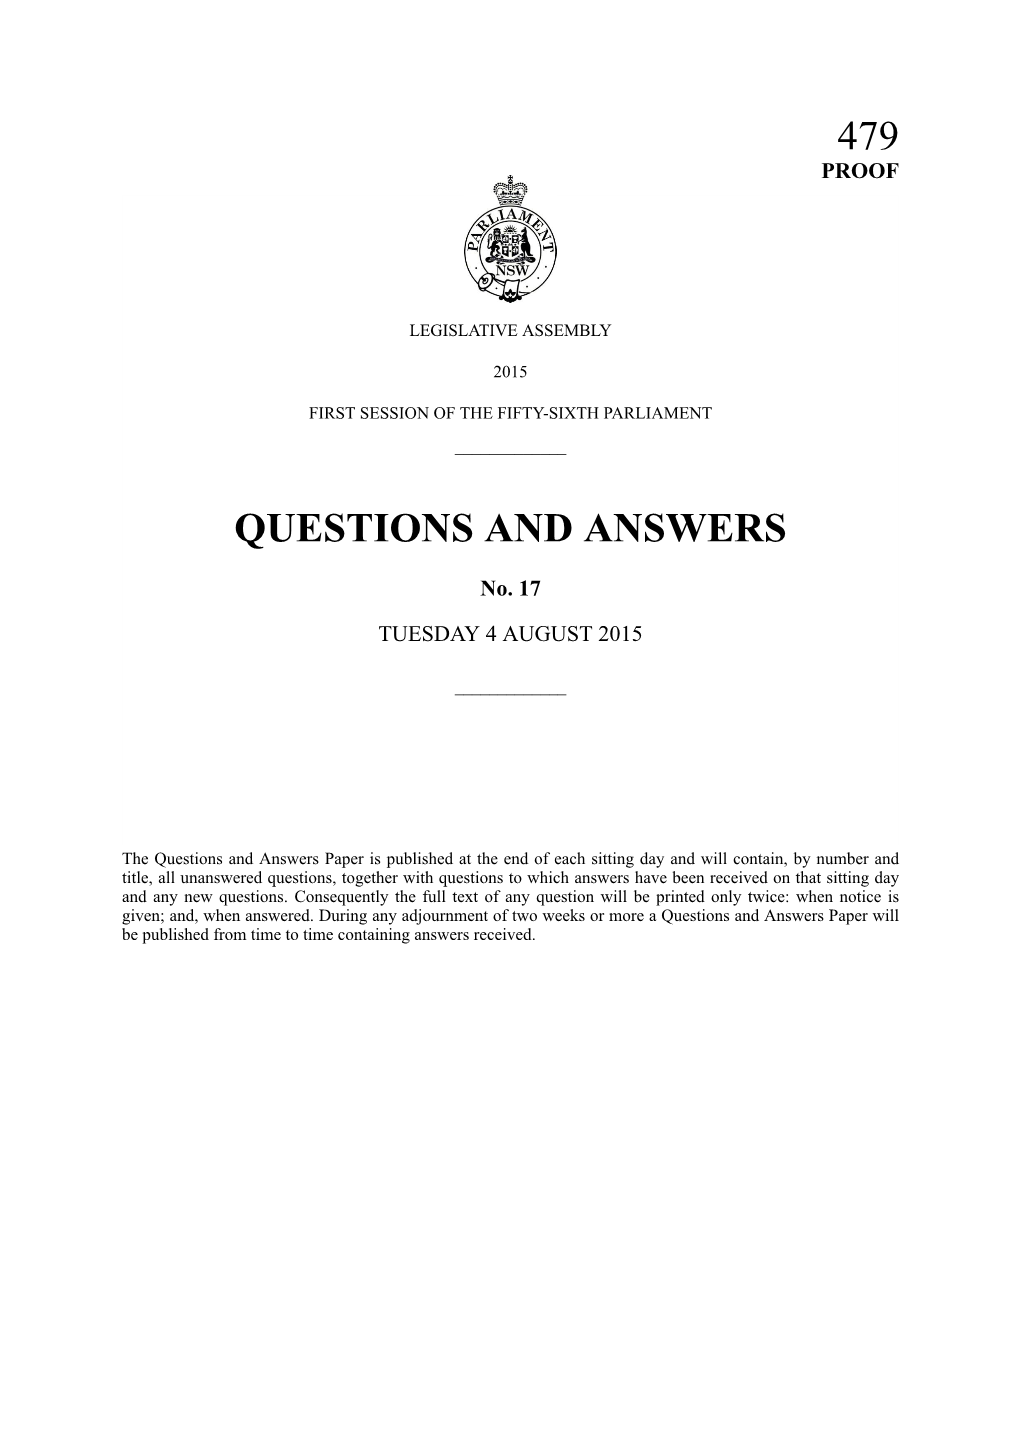 Questions & Answers Paper No. 17